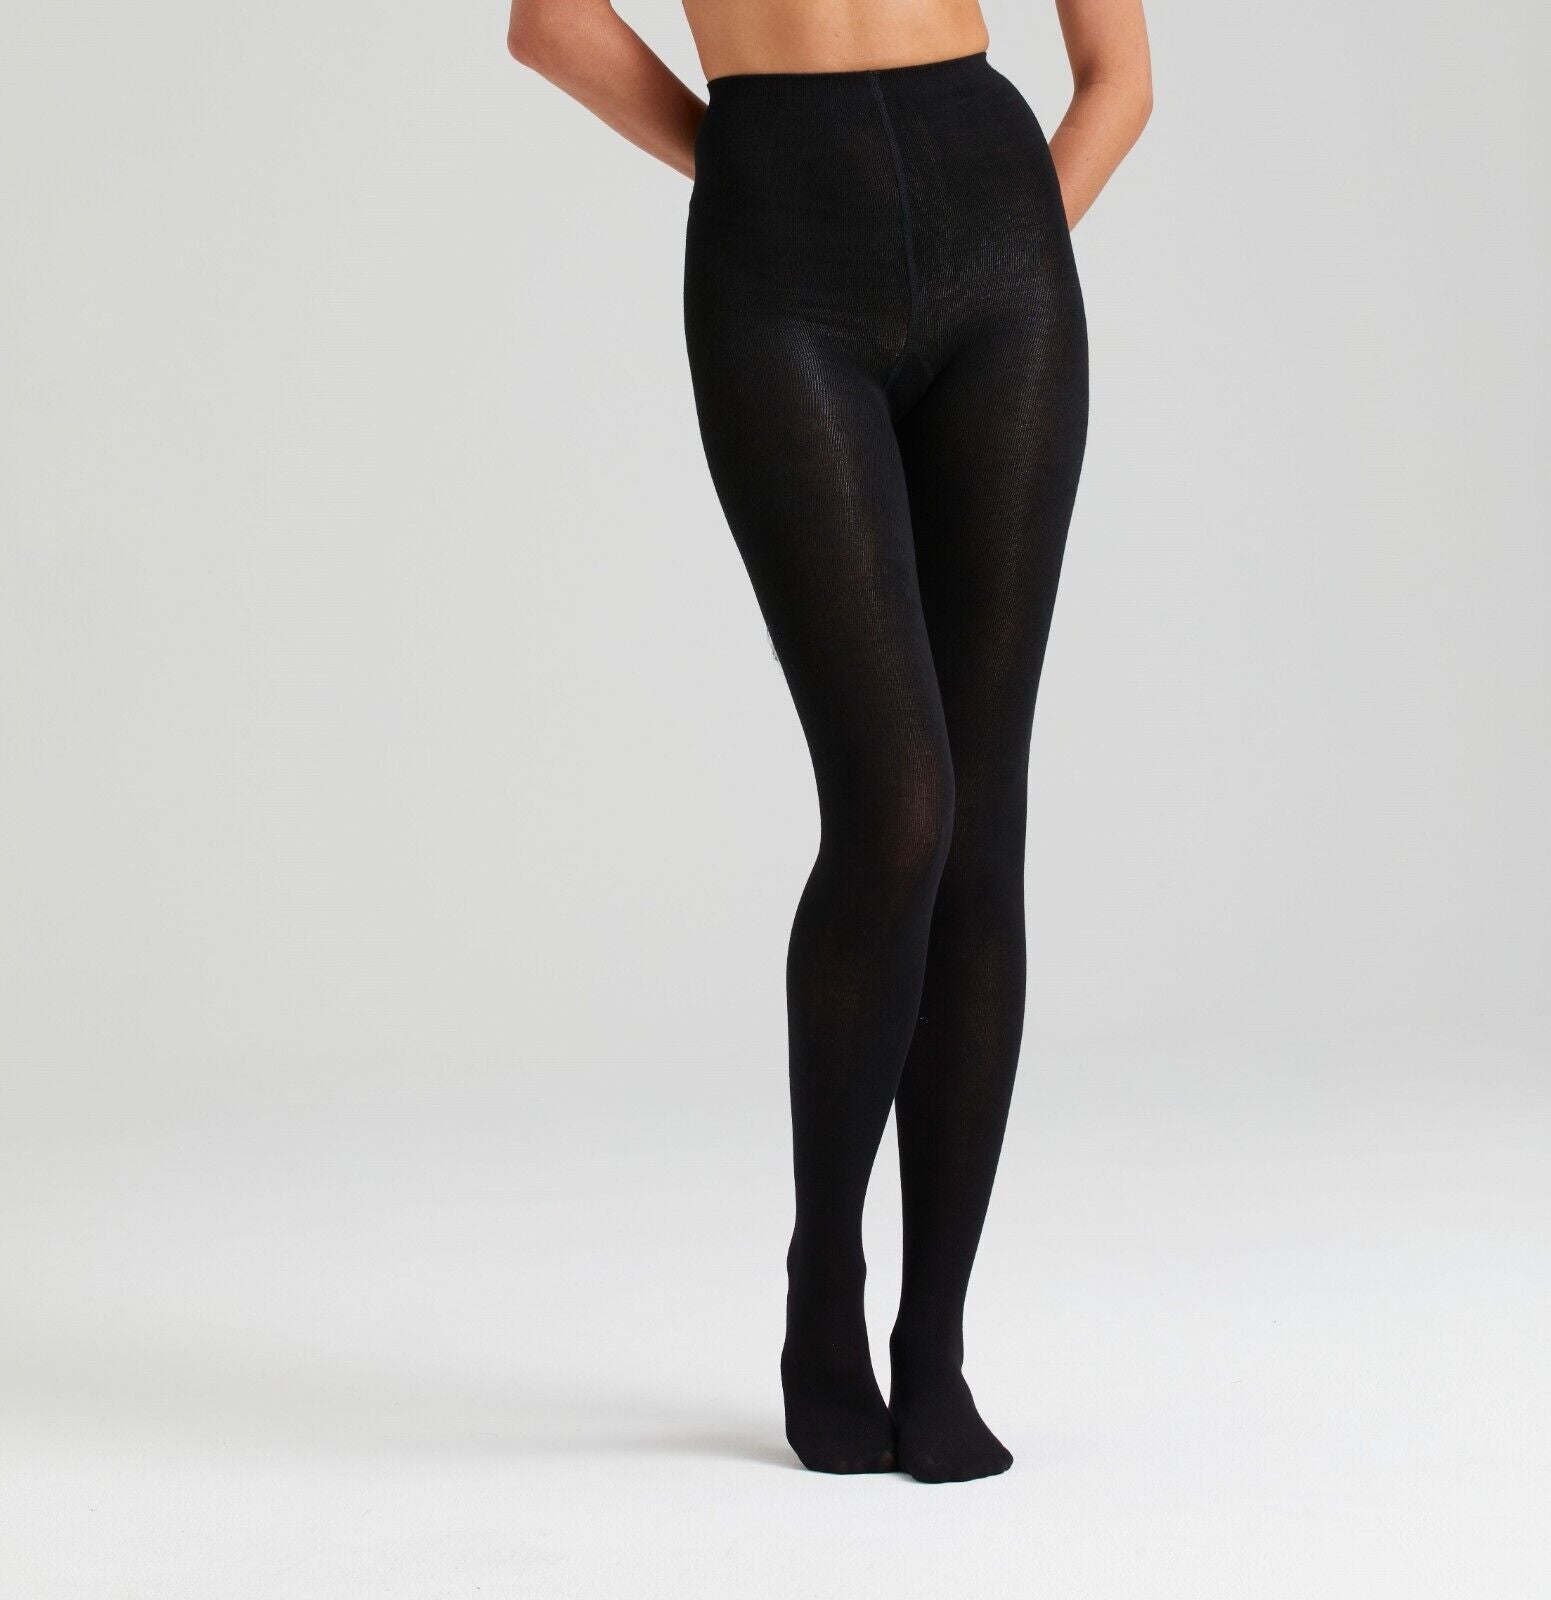 Charnos Bow Patterned Opaque Tights In Stock At UK Tights